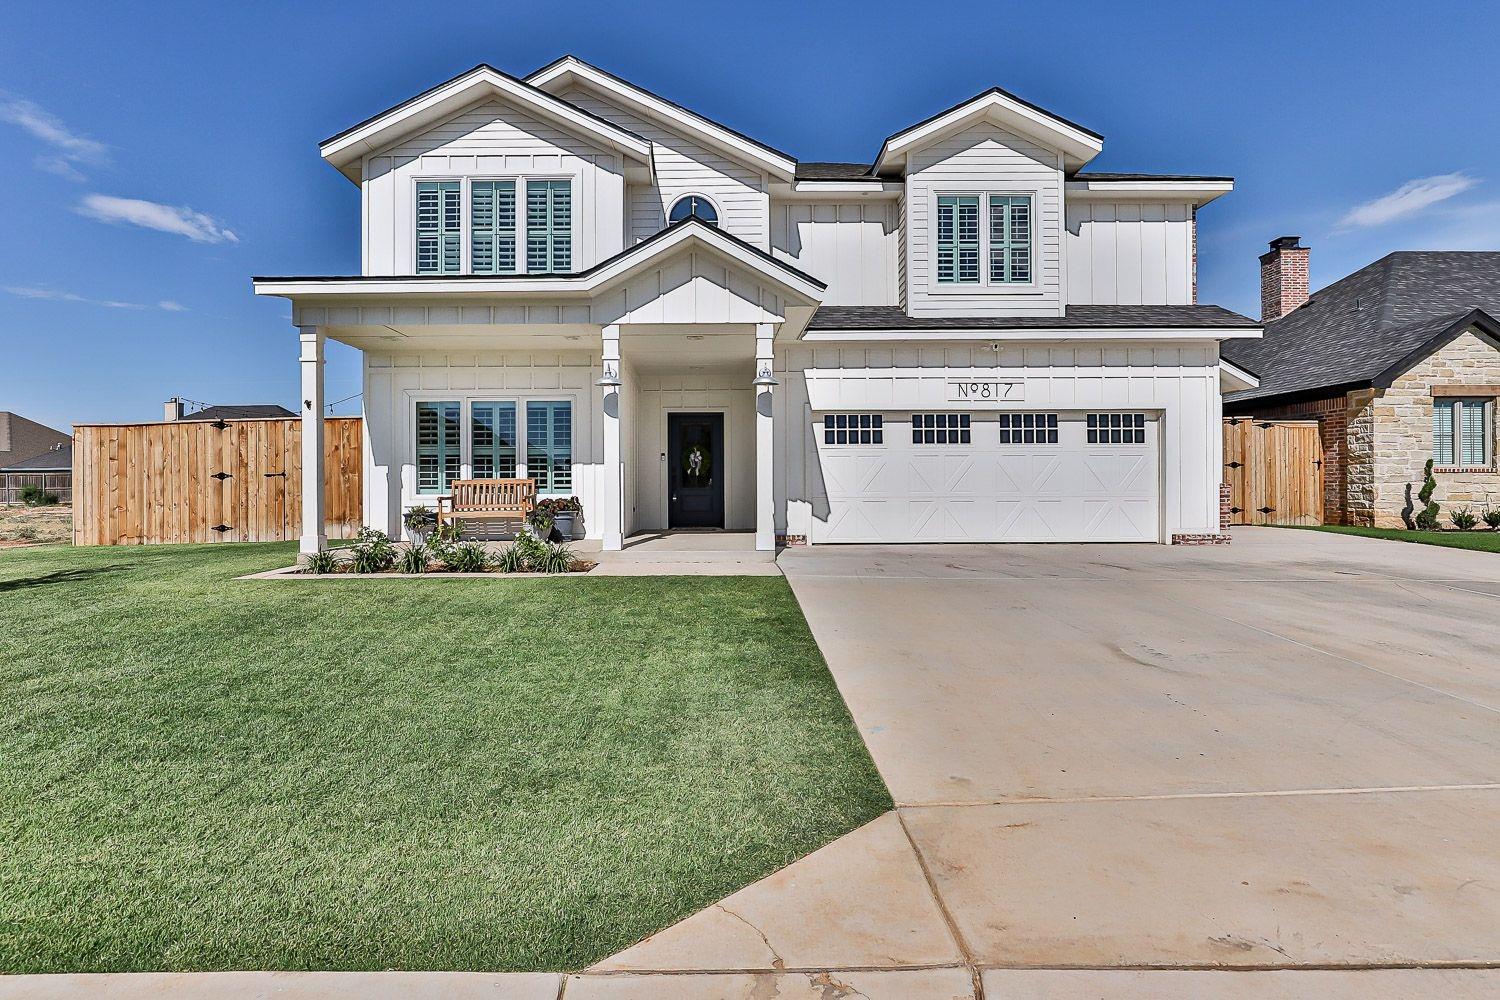 Absolutely Stunning in Shallowater!Crafted by MCR Custom Homes,This 1 Year Old Beauty has Elements of  Modern Farmhouse...Think Clean Lines & Neutral Palette,Then Mix in the Moody Shade of Inkwell in All the Right Places & You Are HOME!Beamed Living Area w/Cozy Fireplace...Windows to the Irresistible Outdoor Living Spaces- Quartz Countertops,Luxury Vinyl Plank Flooring,Custom Window Treatments-Dine in Style w/Island Seating & Built-in Bench Framed by Handcrafted Cabinets-Chef-Ready Kitchen...Gas Cooktop,Quartz Countertops,Super Pantry-Brick Accents in Kitchen & 4th Bedroom/Office-Primary Retreat w/Gorgeous Ensuite Bath...Double Sinks,Soaking Tub & Beautiful Shower-Excellent Closet Flows into Laundry Area! More Living Upstairs...Creative Play/Toy Area & Family/Media Room w/Walk-Out Storage Plus 2 Charming Bedrooms & Bath- Outdoor Living Just May be the Family Favorite...Artfully Designed w/20x20 Covered Patio, Raised Beds, Soothing Fountain & String Lights-This One Just Feels Like HOME!